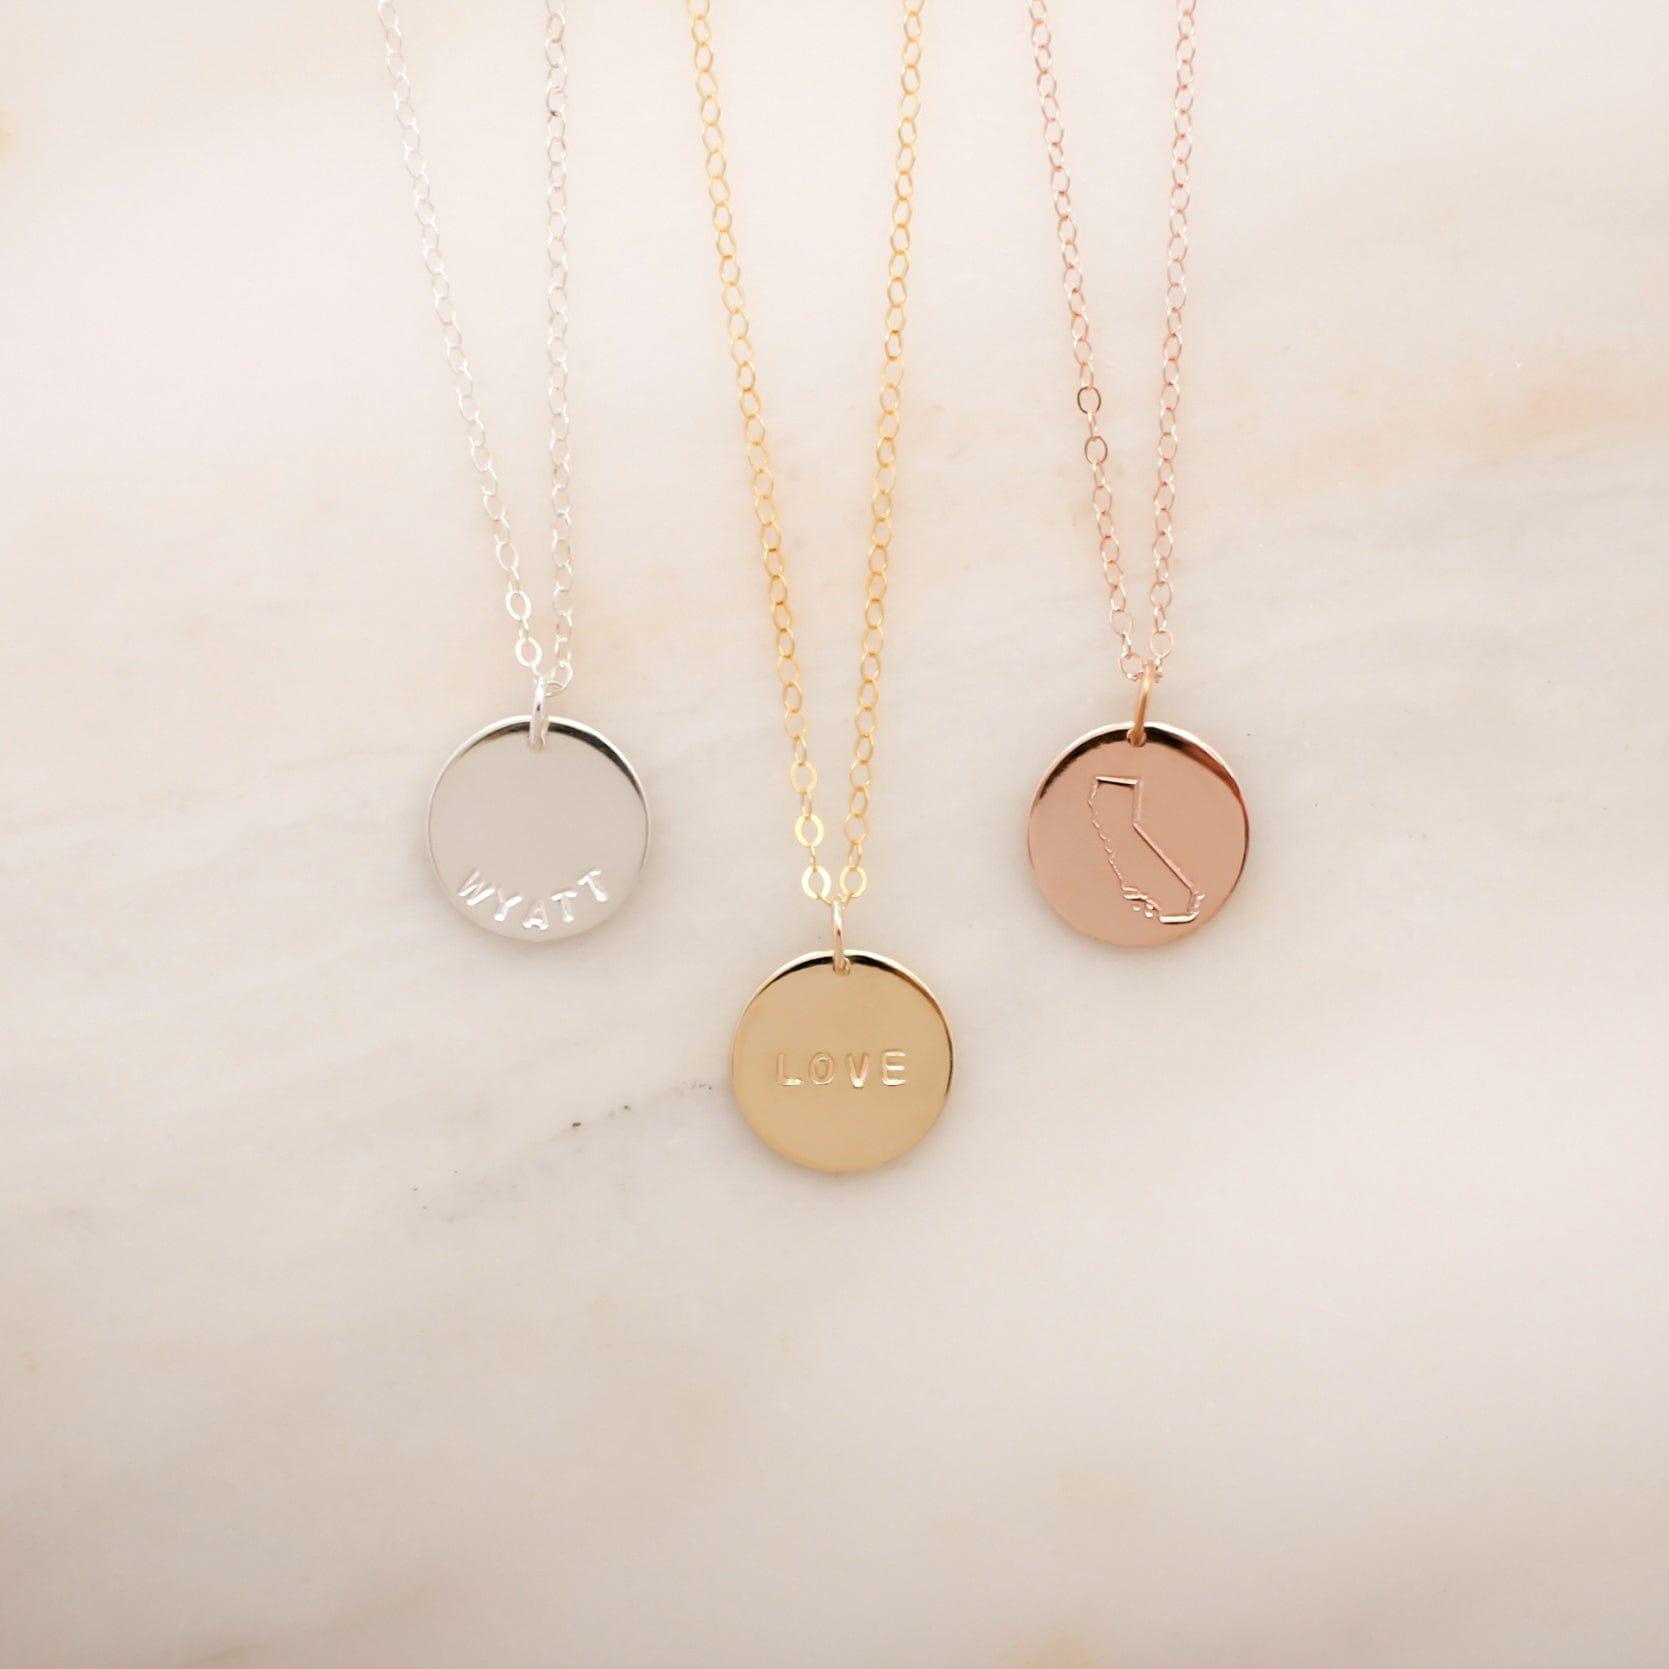 Medium Disc Necklace - Nolia Jewelry - Meaningful + Sustainably Handcrafted Jewelry